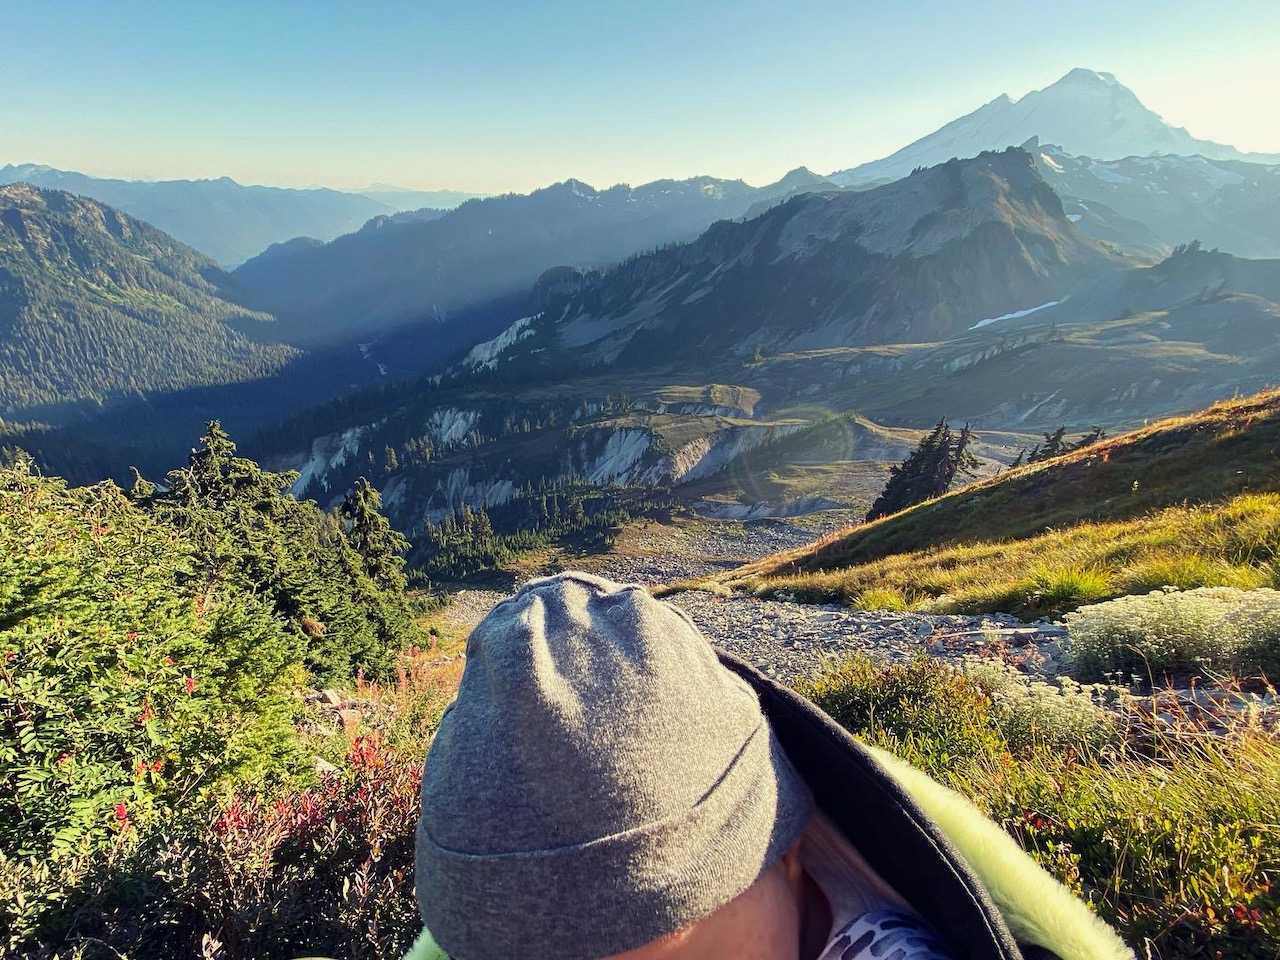 The top of a baby's head covered in a little gray hat, in the mountains